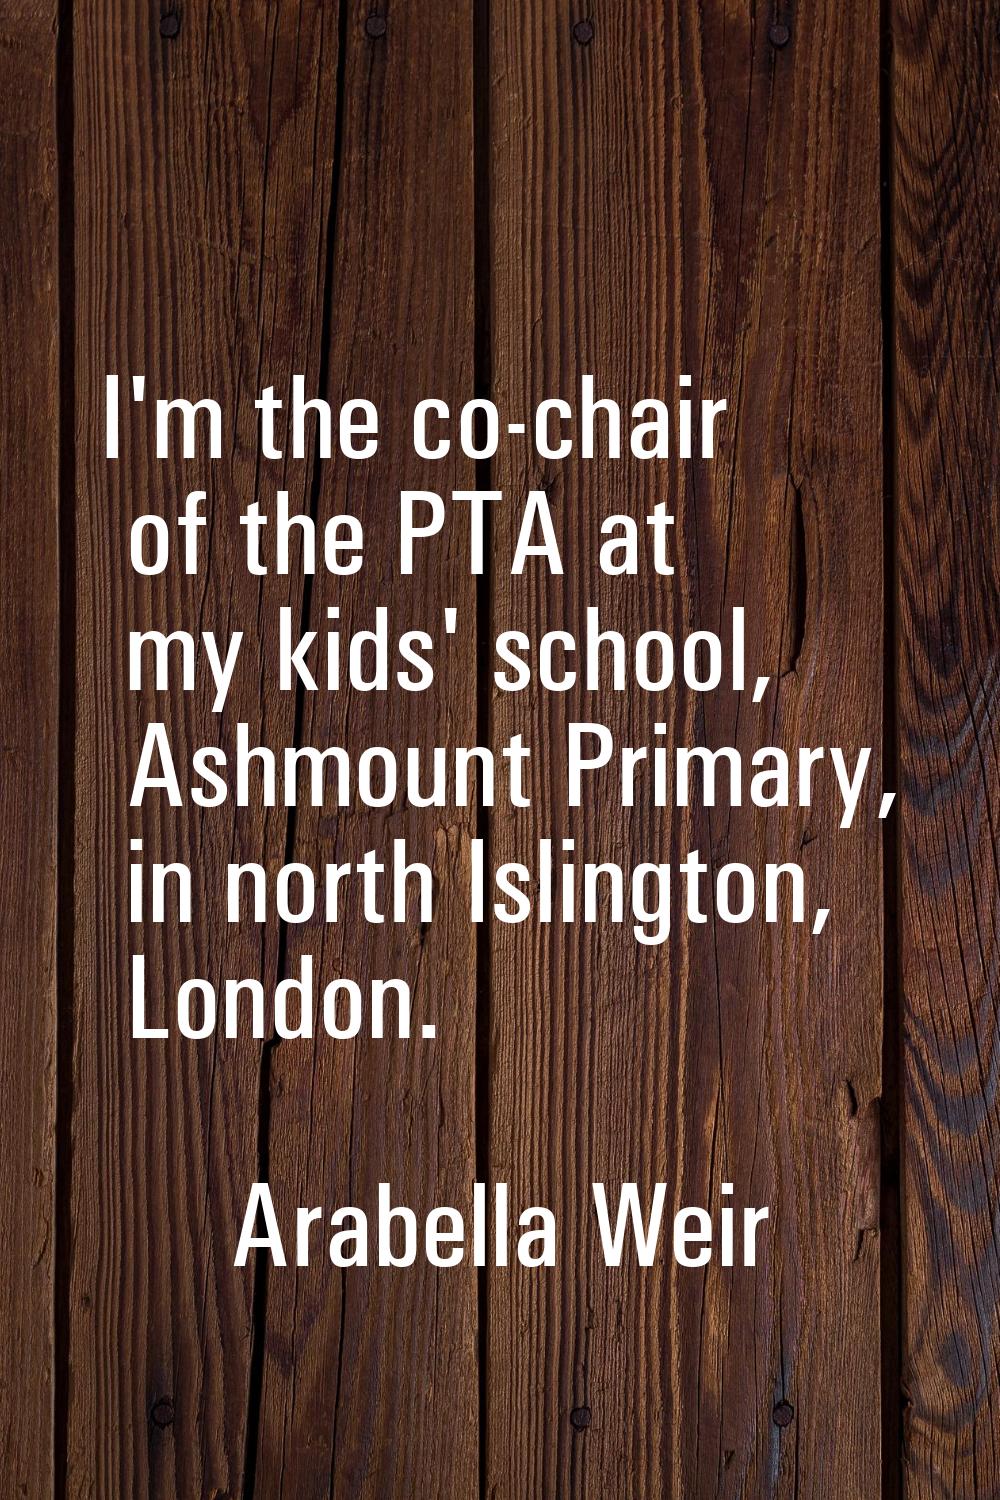 I'm the co-chair of the PTA at my kids' school, Ashmount Primary, in north Islington, London.